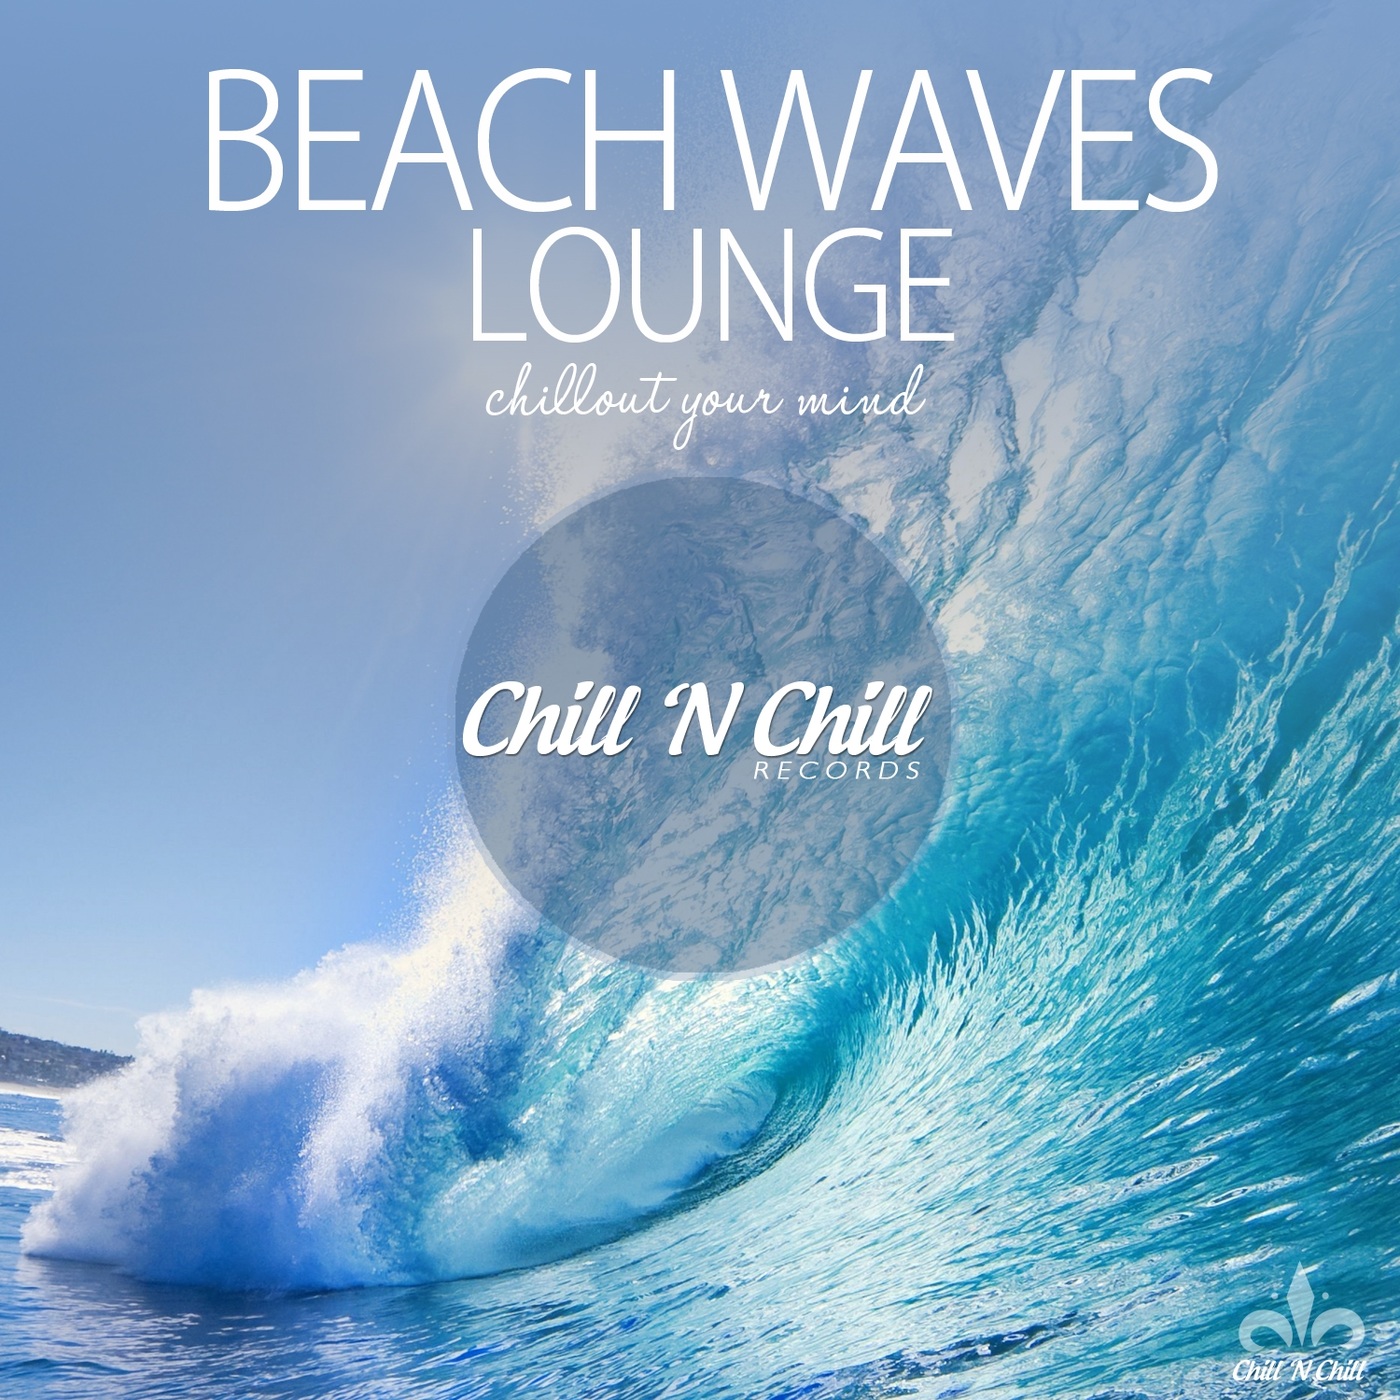 chill n chill records《beach waves lounge：chillout your mind》cd